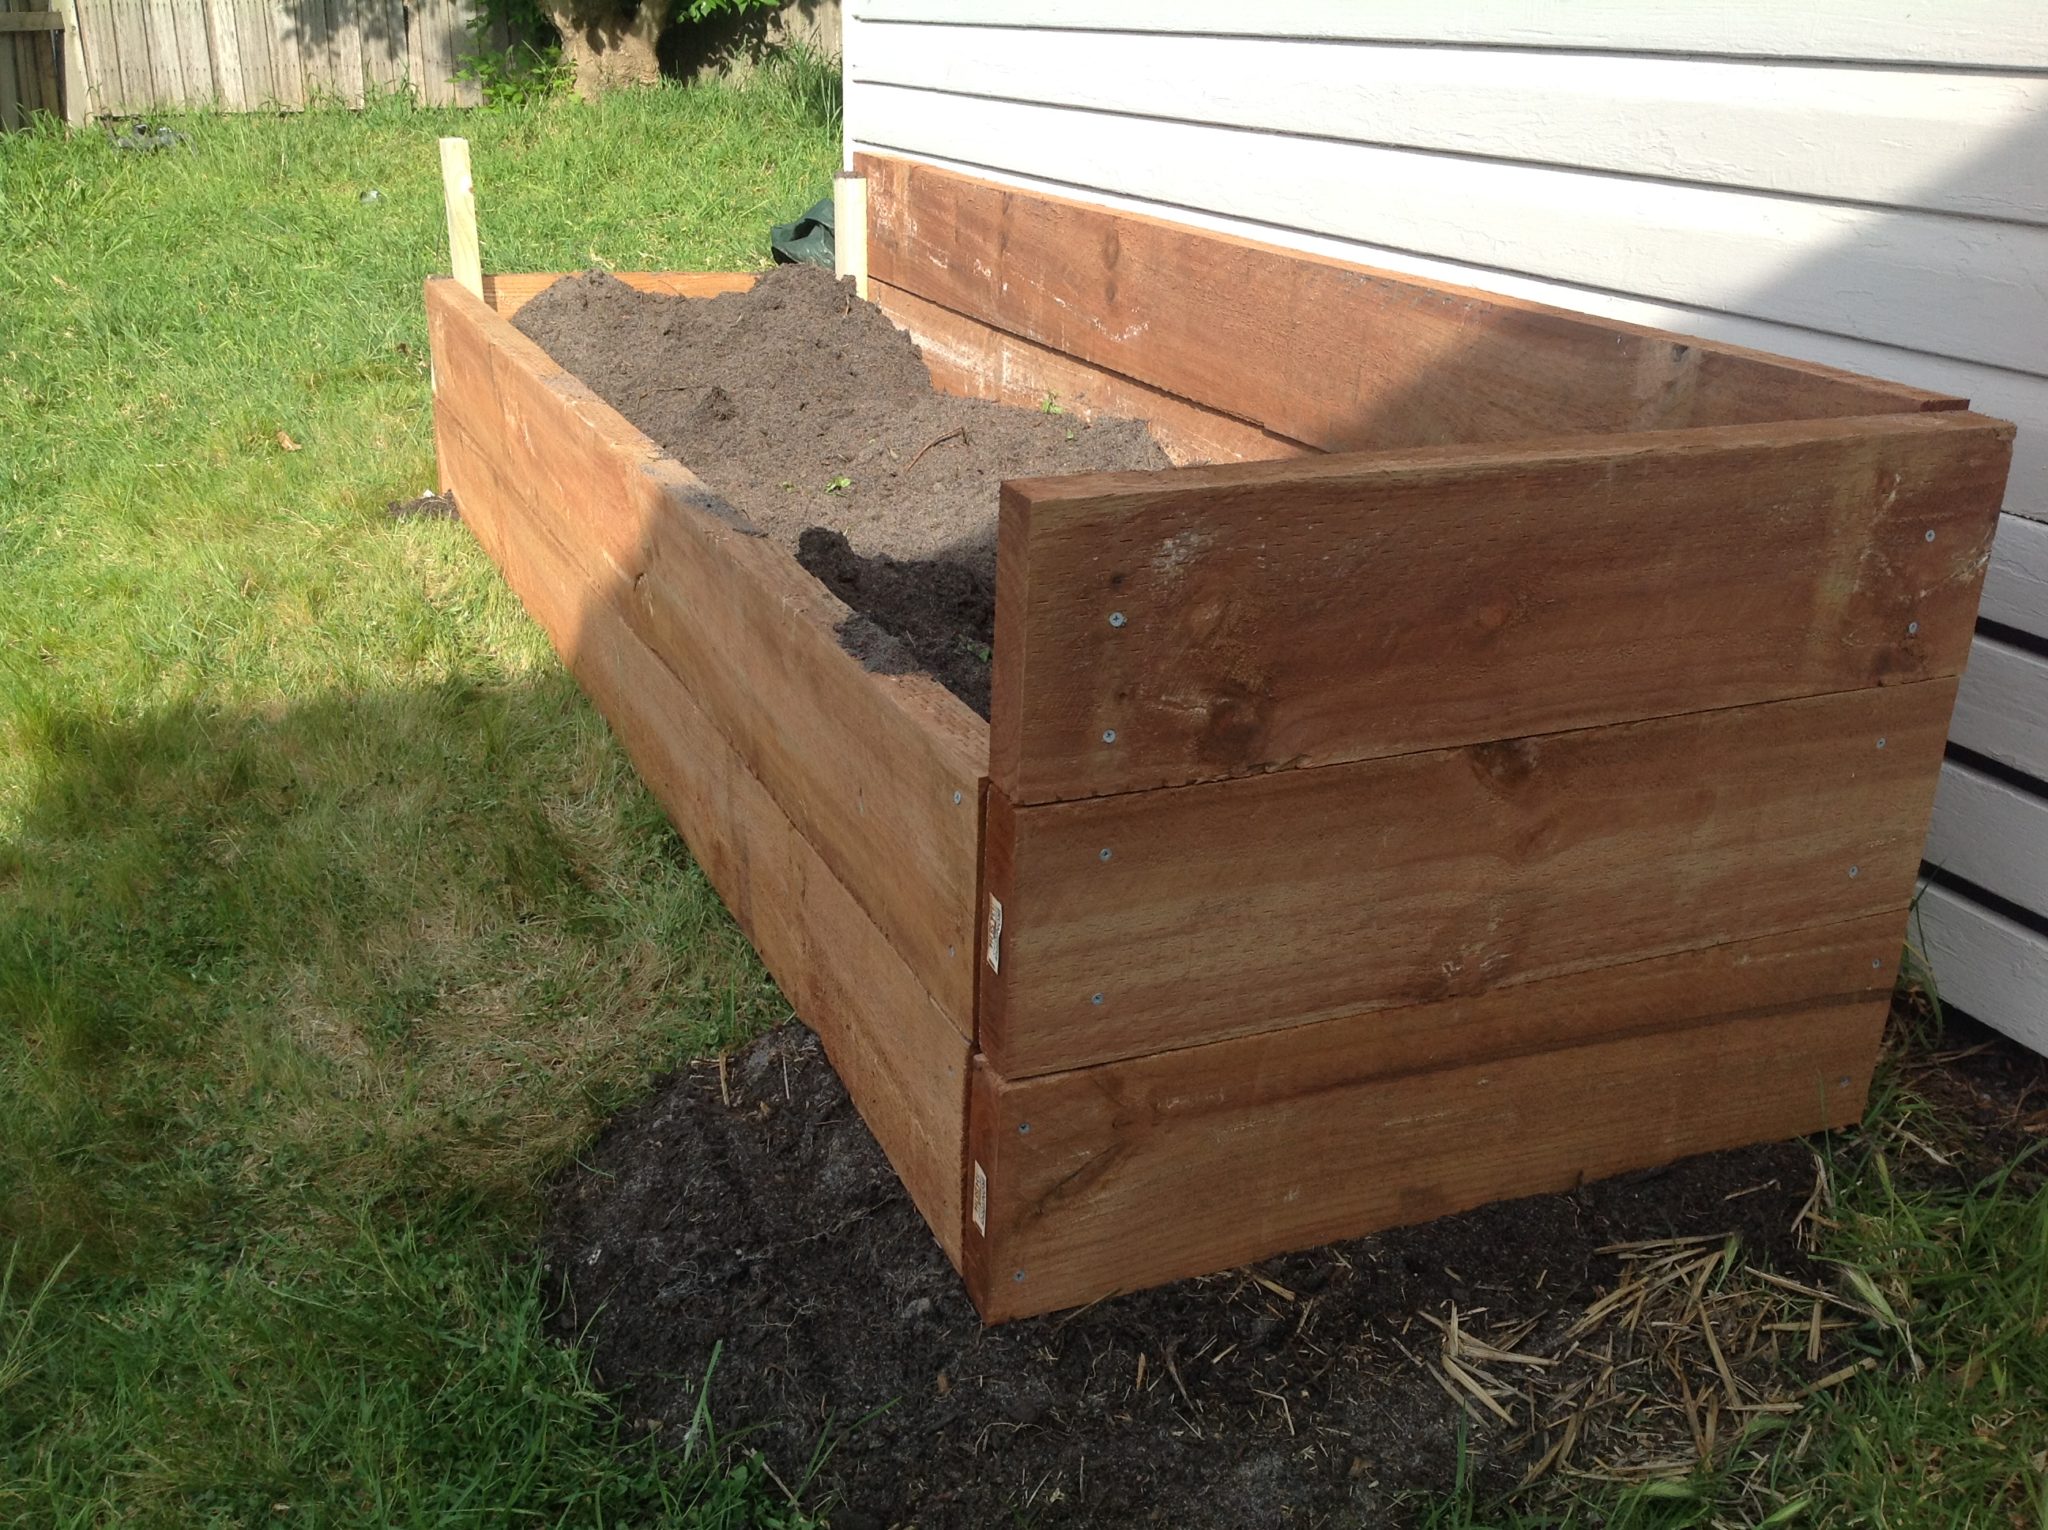 Build A Raised Garden Bed Heritage Farm, Are Treated Pine Sleepers Ok For Vegetable Gardens